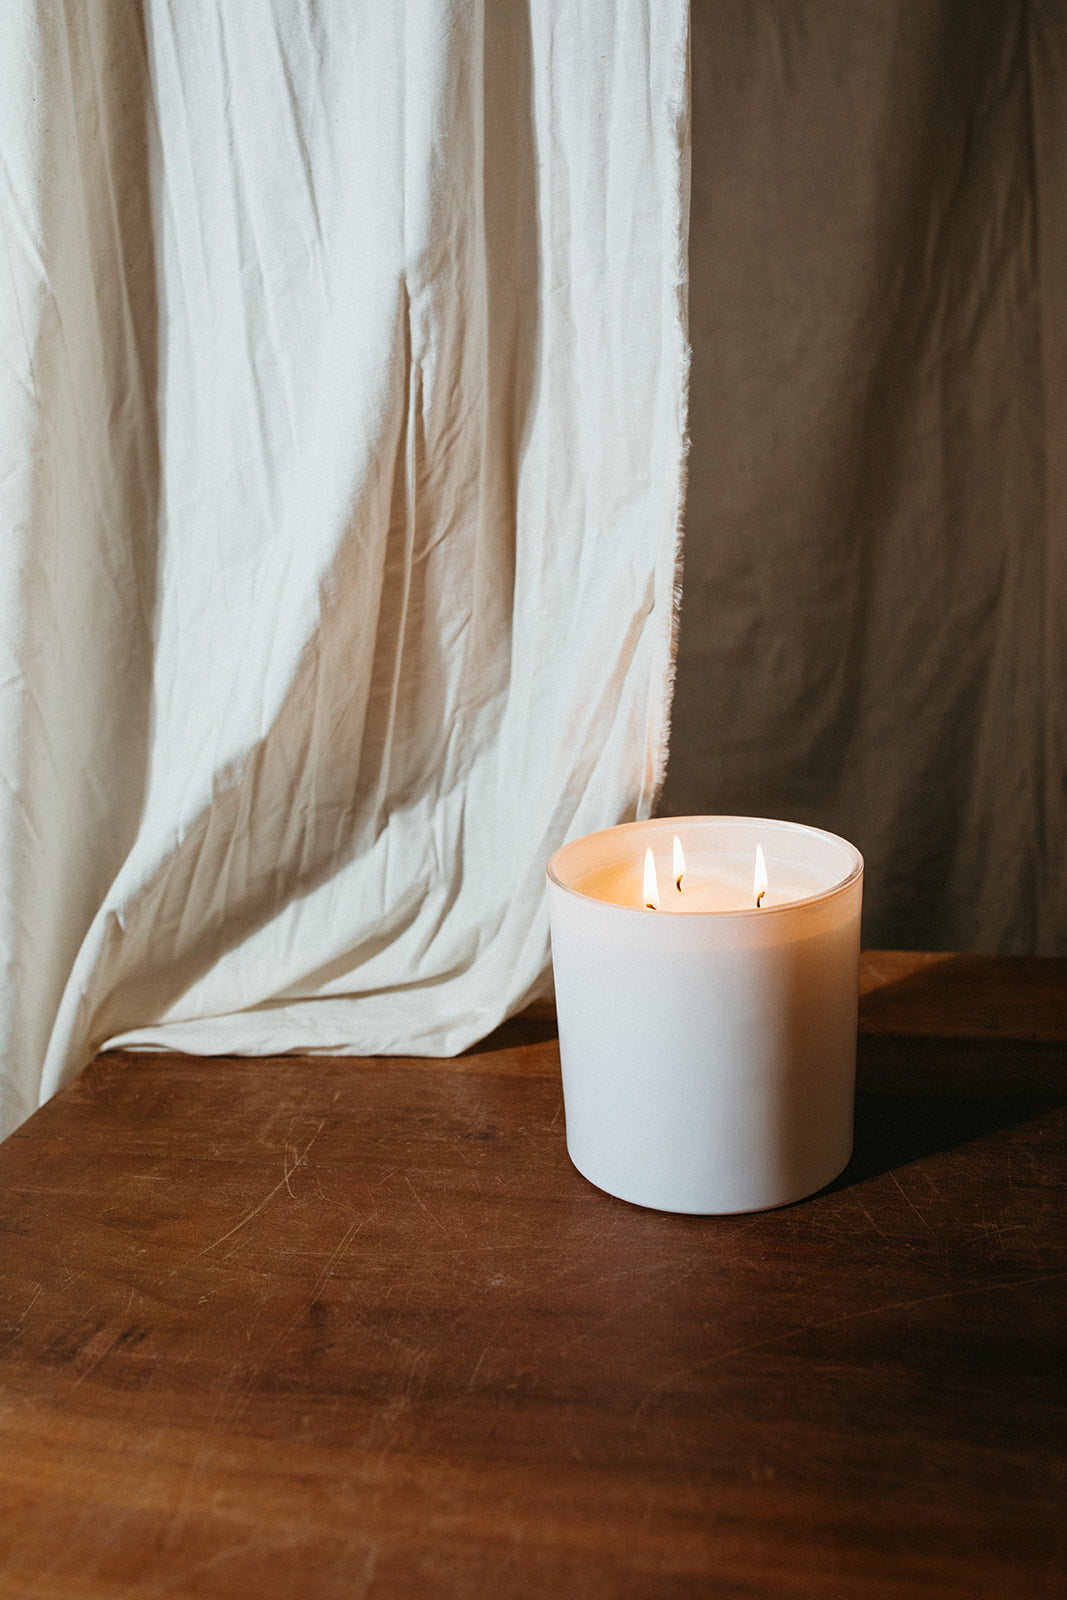 Zion 3 Wick Candle - The Roosevelts Candle Co.